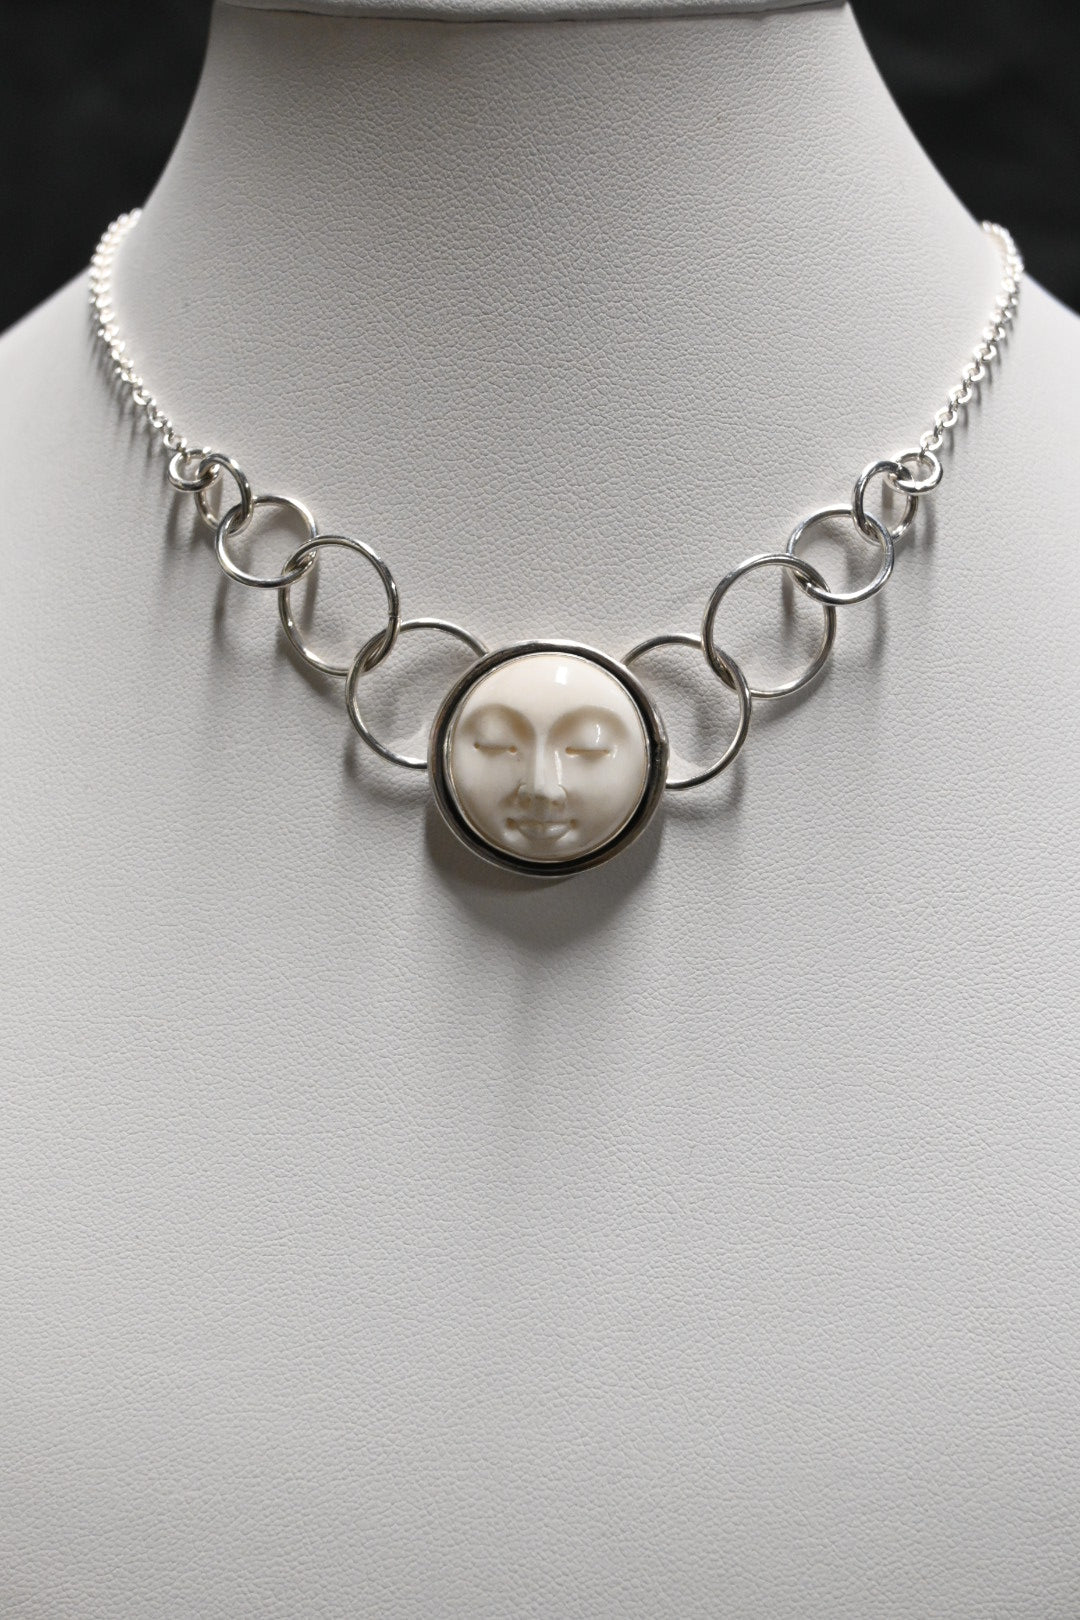 Carved Bone Moon Necklace